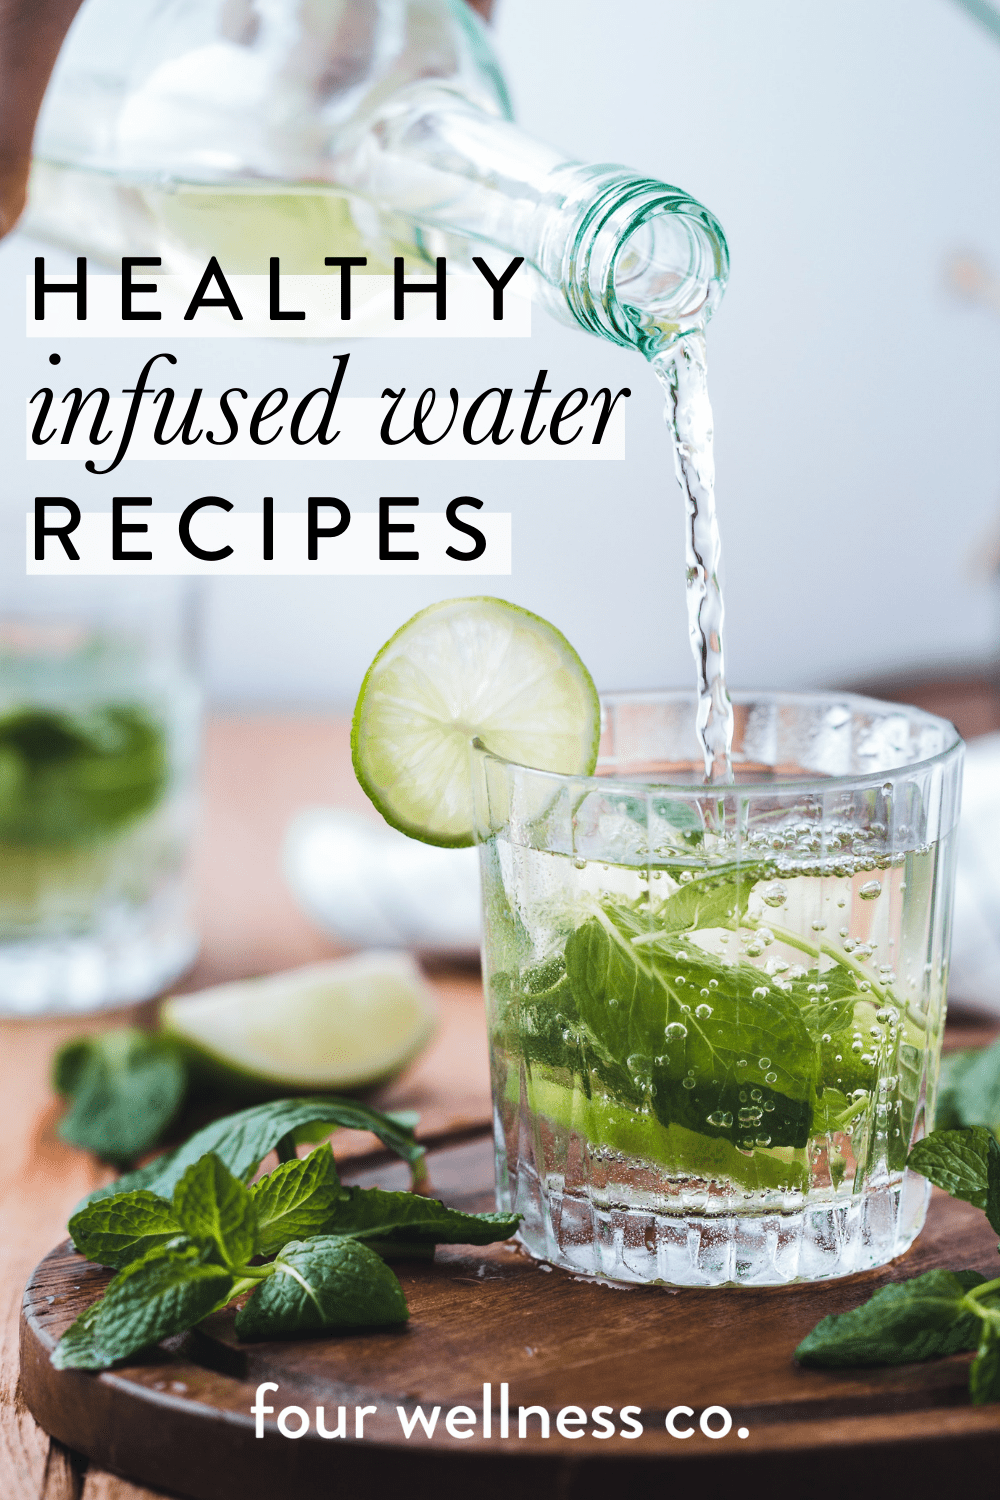 Cucumber Water - Healthy Recipes Blog